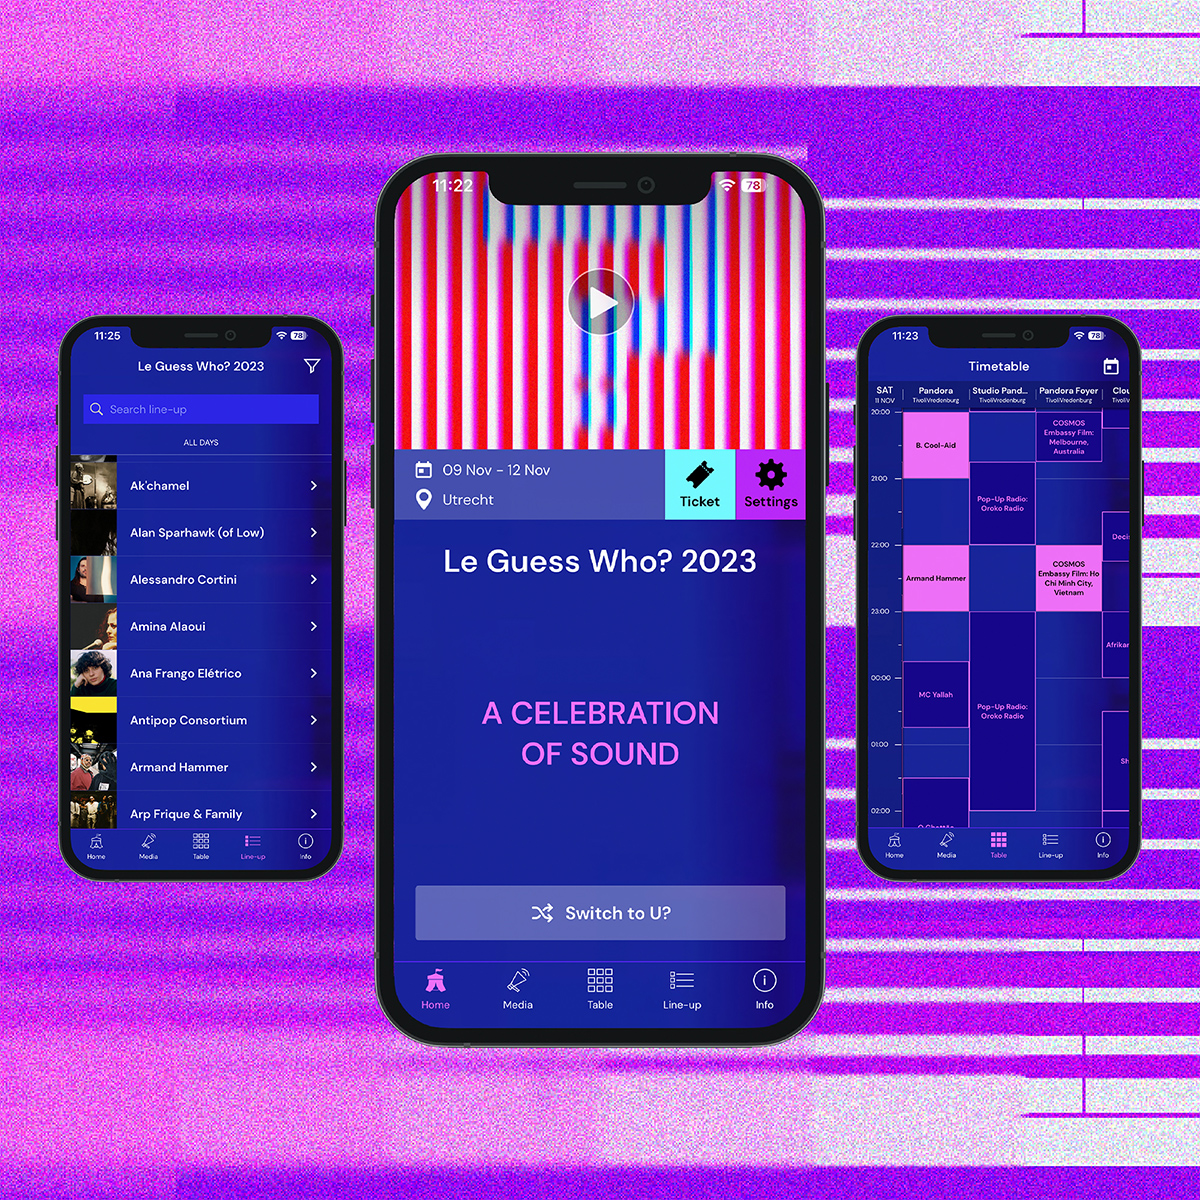 Official Le Guess Who? 2023 app now available